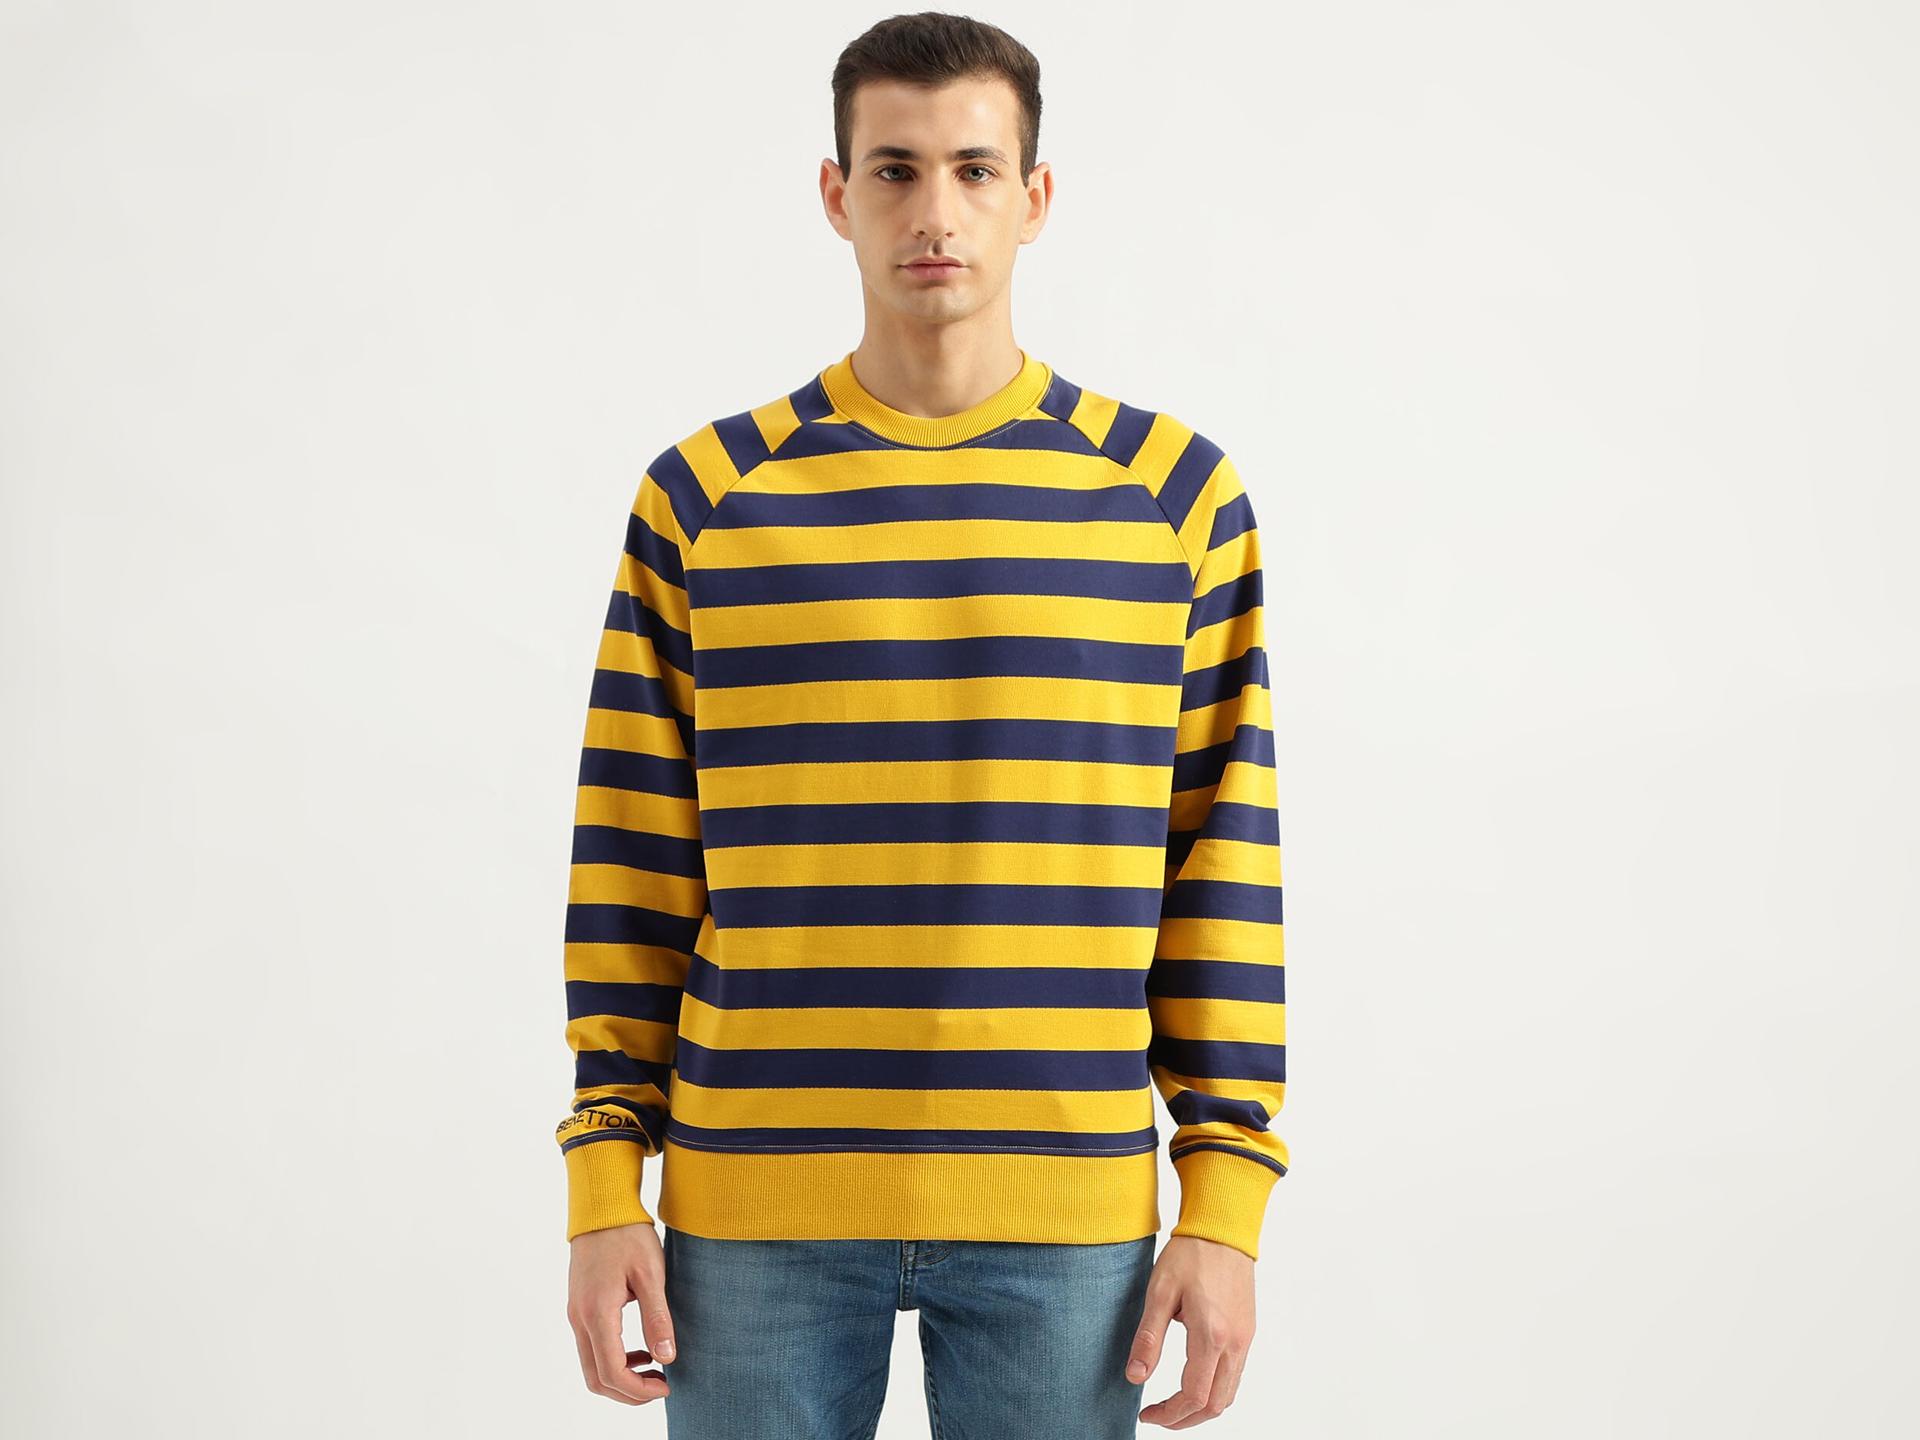 men's-relaxed-fit-round-neck-striped-sweatshirt